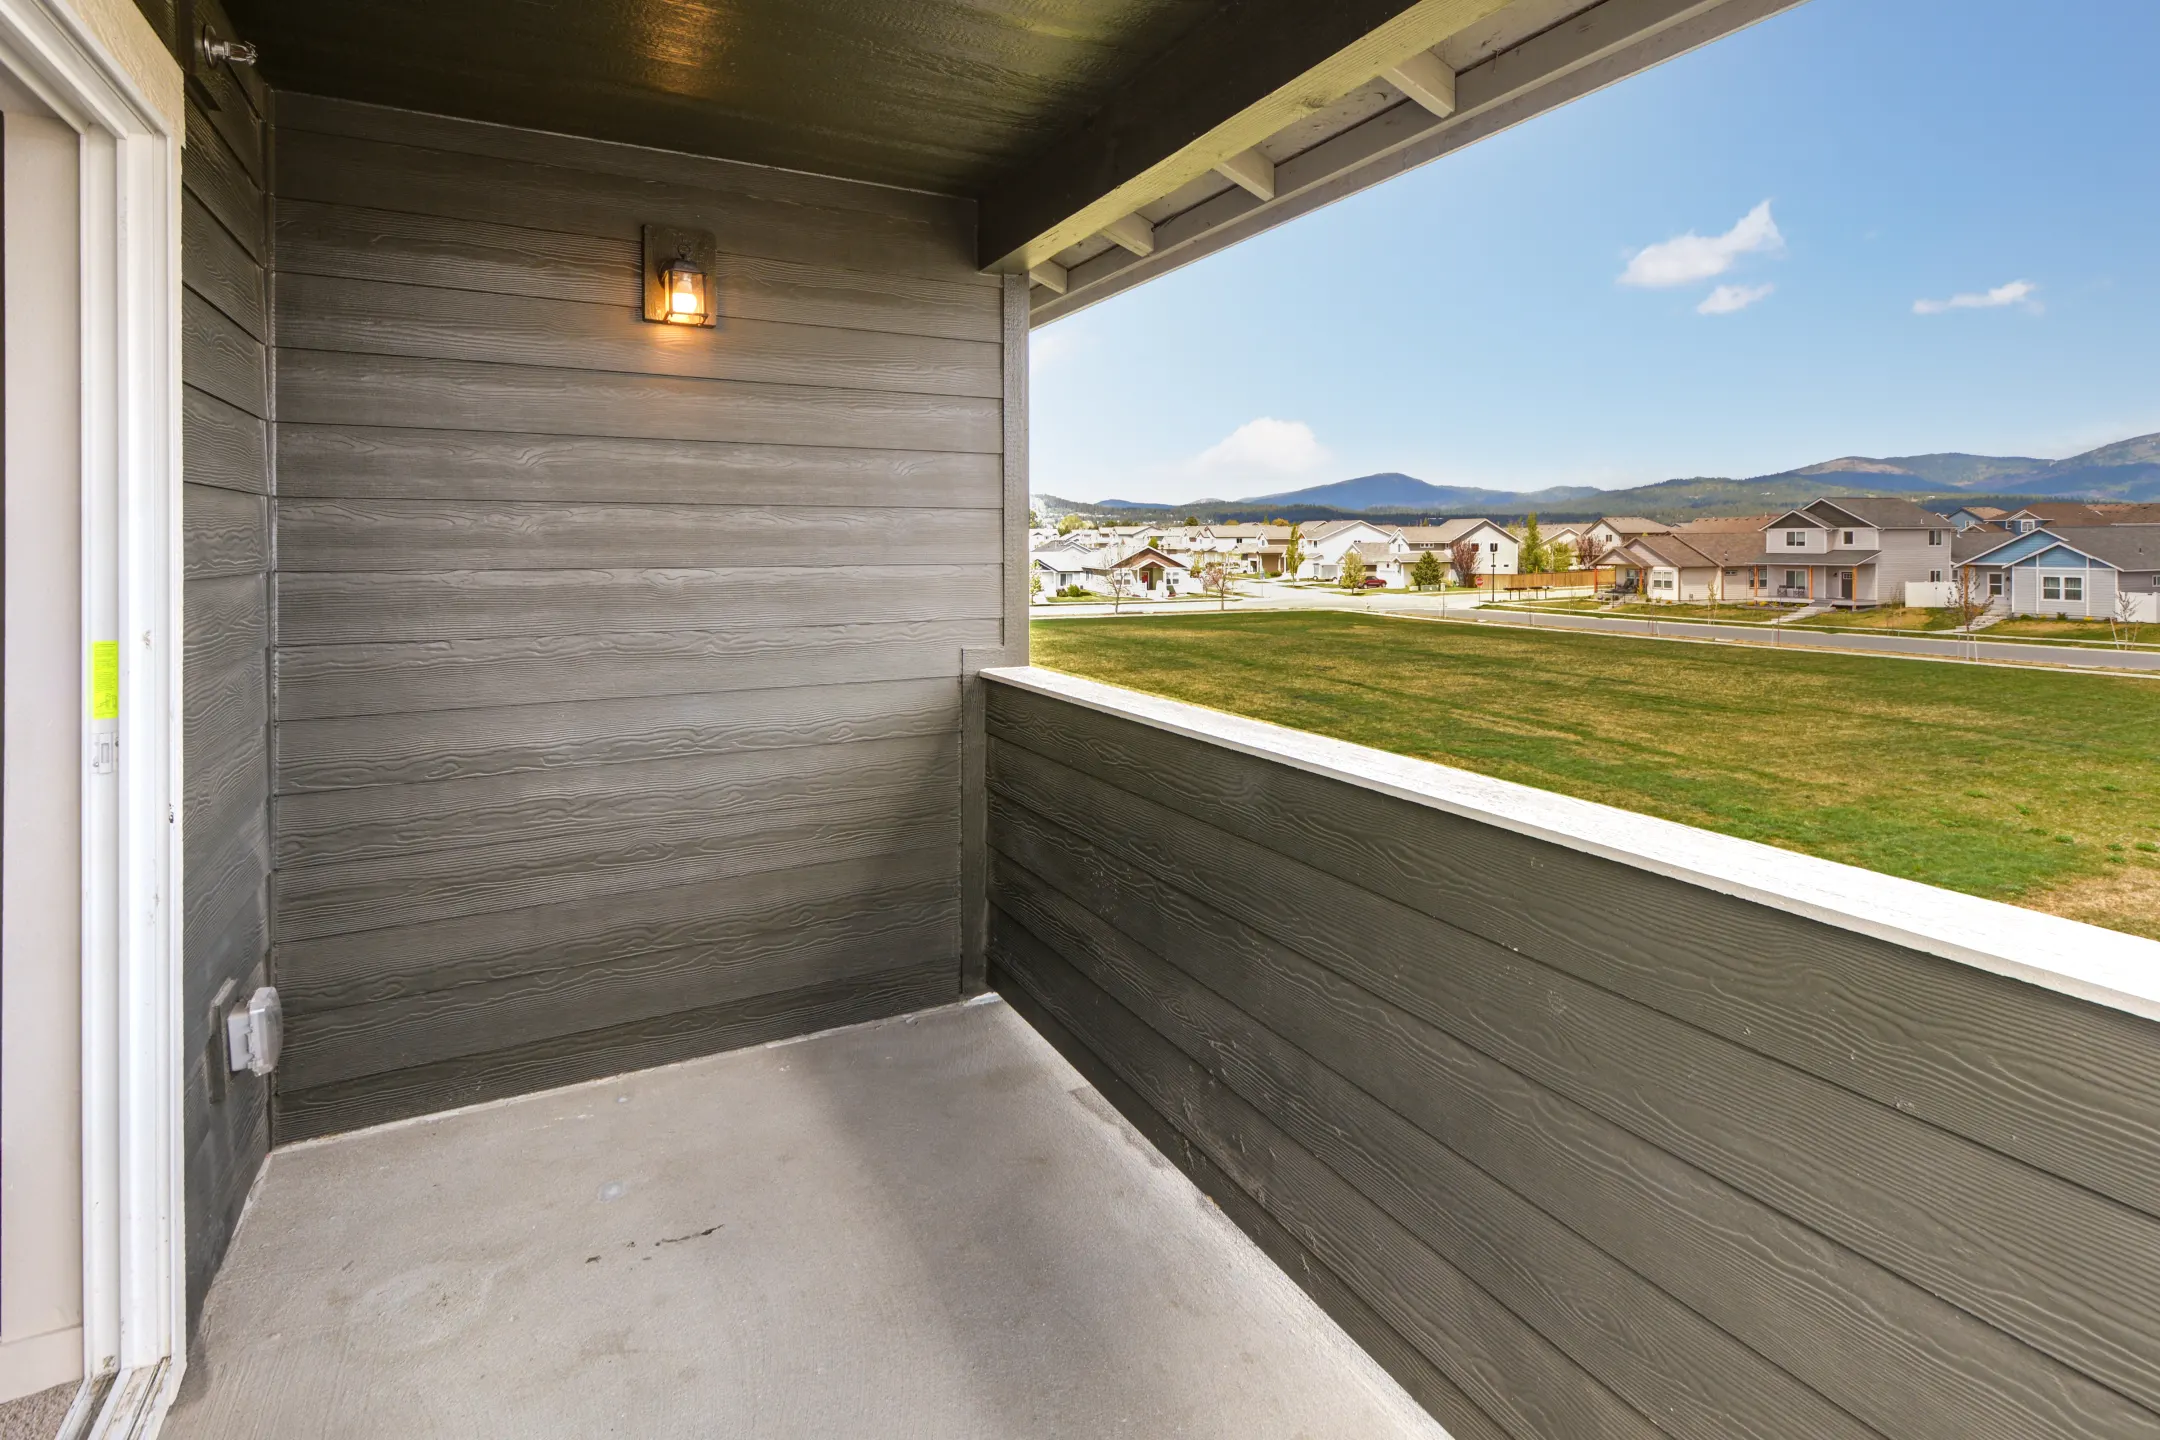 Patio / Deck - Crown Pointe Apartments - Post Falls, ID